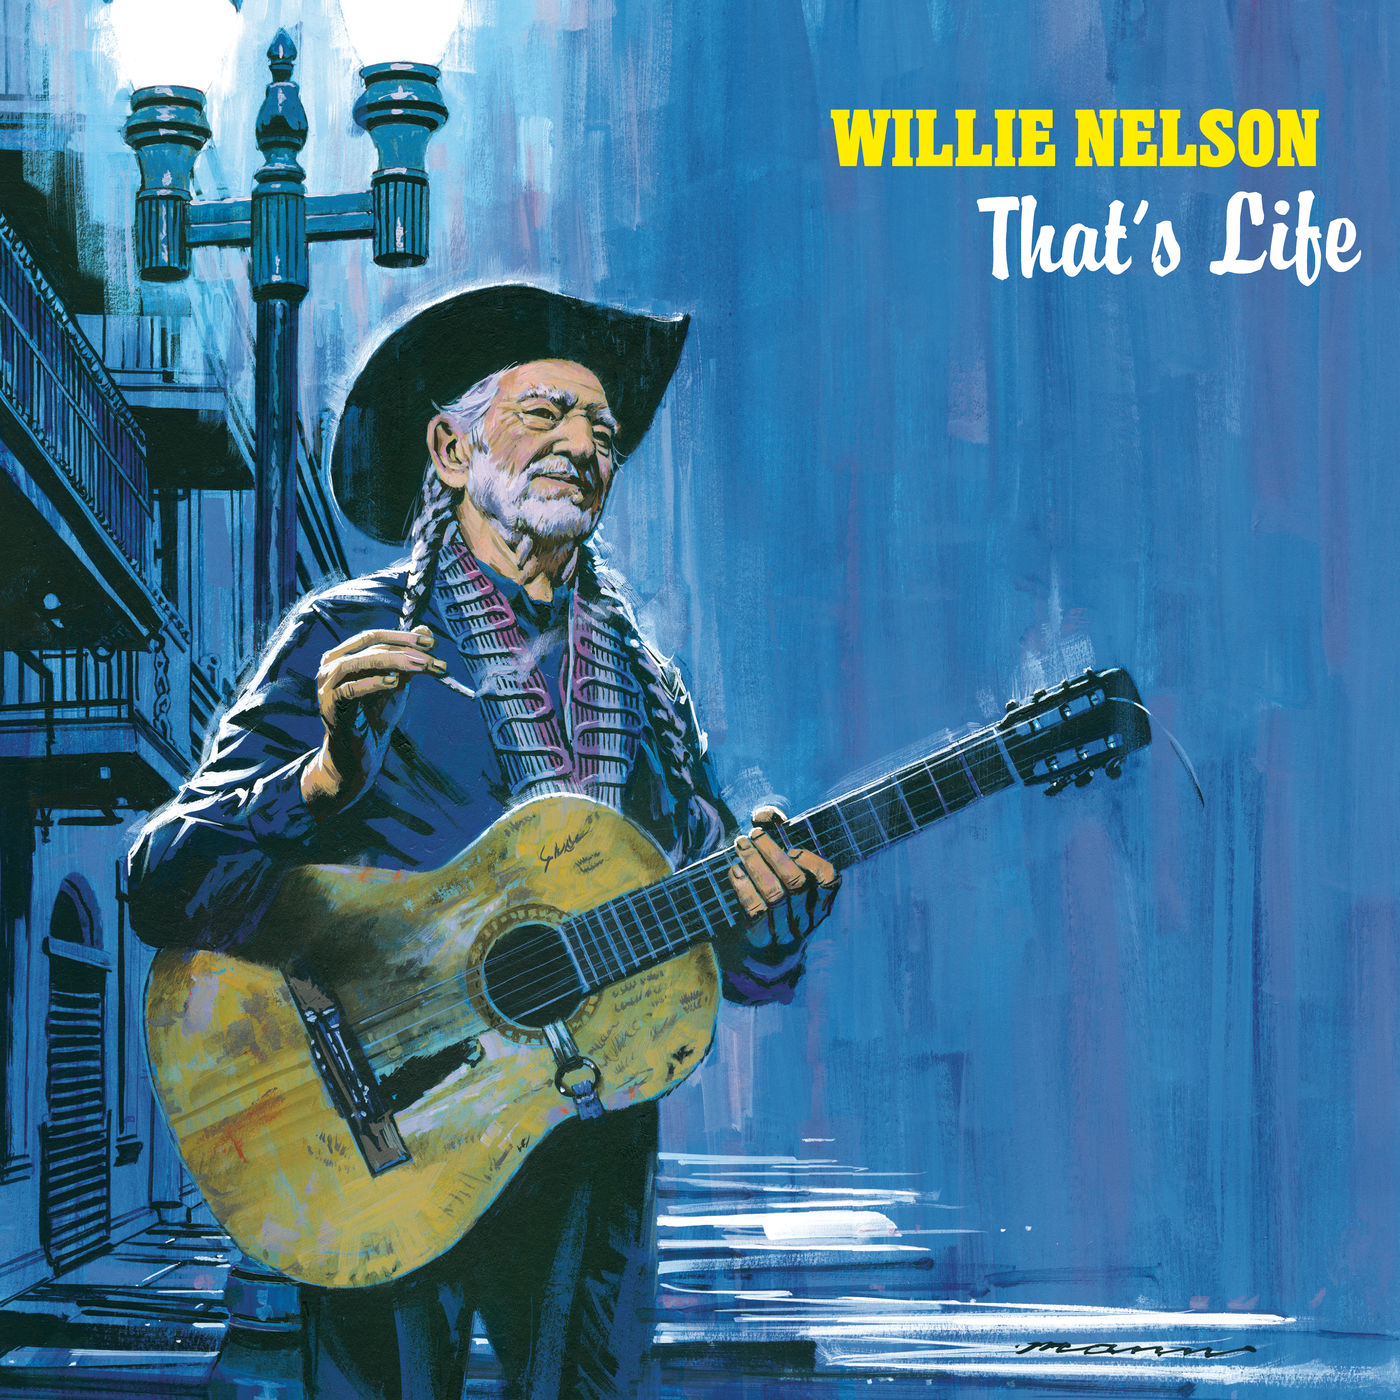 Willie Nelson - 2021 - That's Life [2021 Sony Legacy Records] 24-44.1